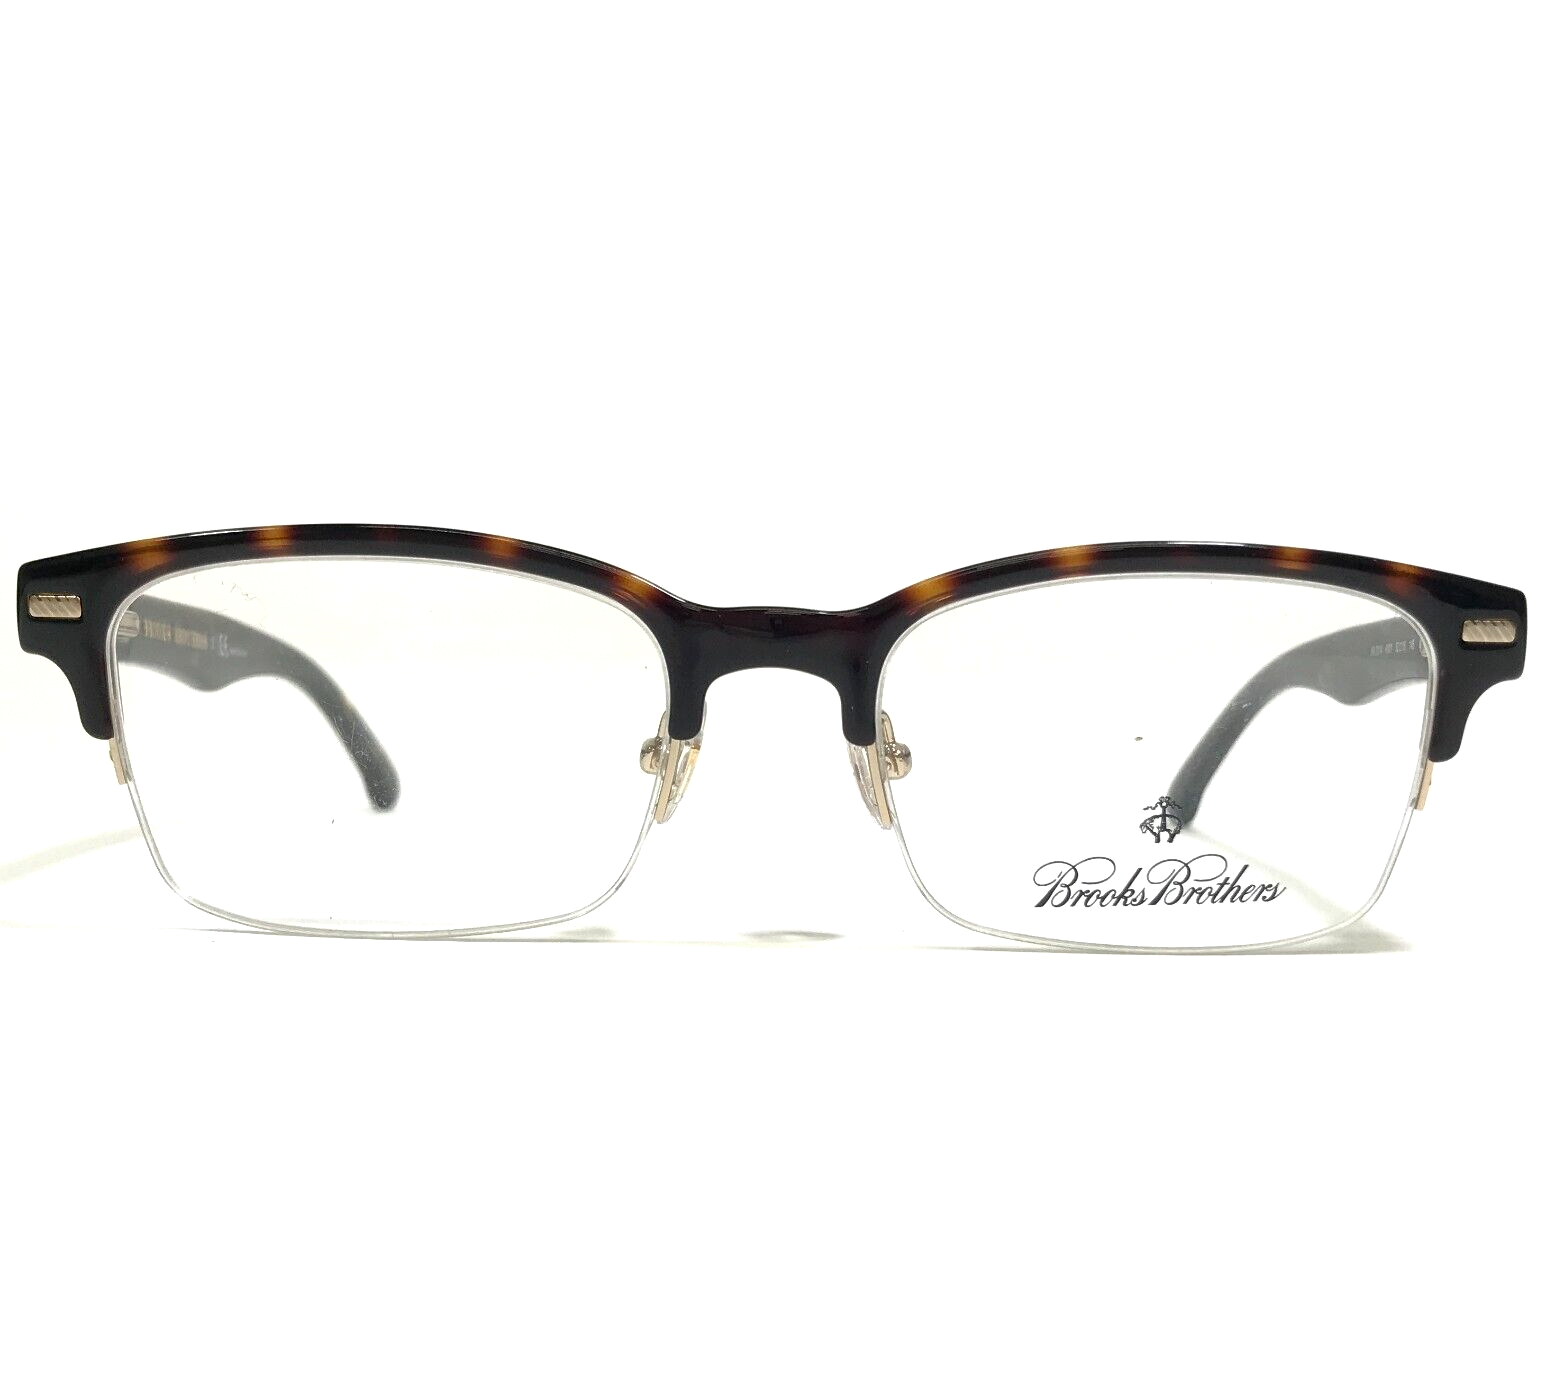 Primary image for Brooks Brothers Eyeglasses Frames BB2014 6001 Brown Tortoise Rectangle 52-18-145